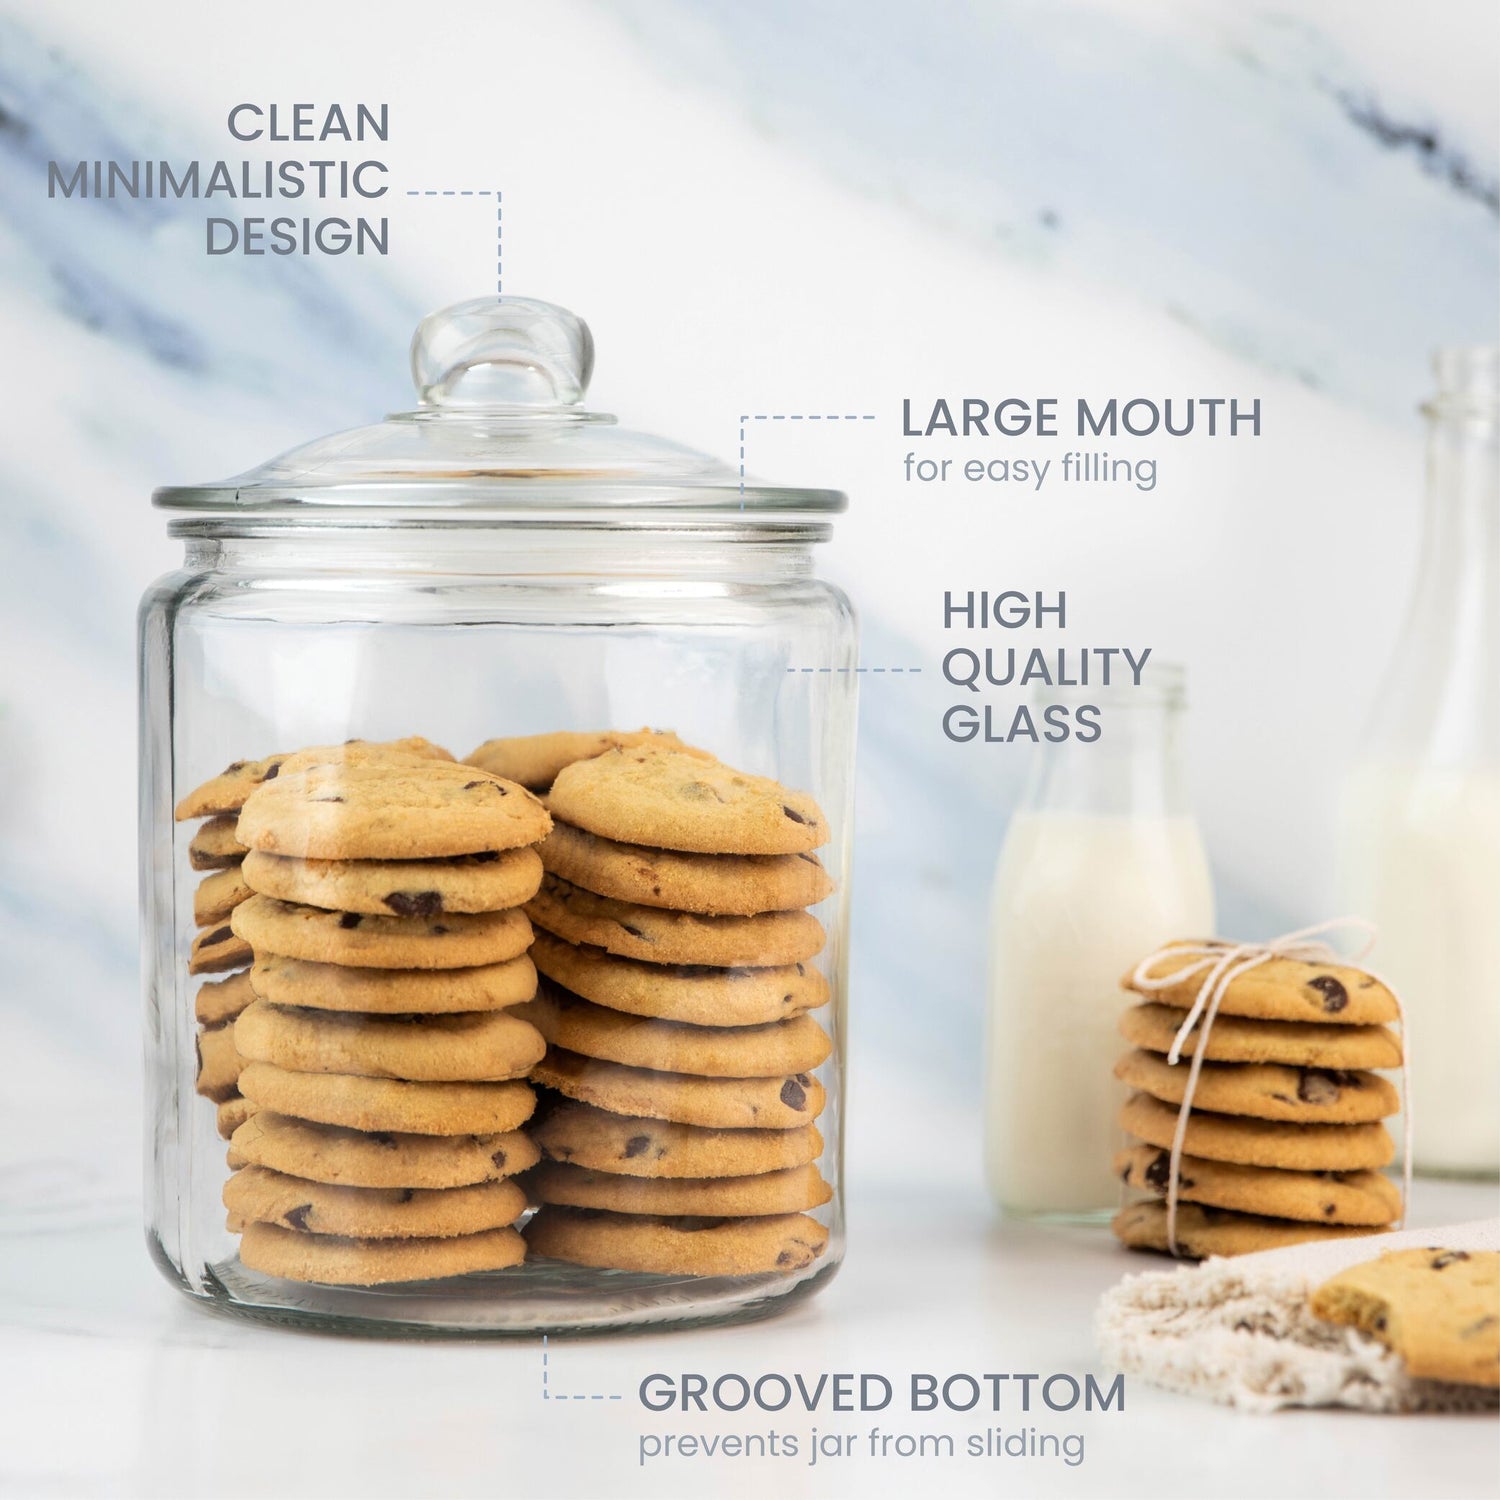 Kitchentoolz 1 Gallon Glass Cookie Jar - Large Food Storage Container with Airtight Lid - Keep Fresh Flour Chewy Pet Treats Candy Dried Foods Detergen